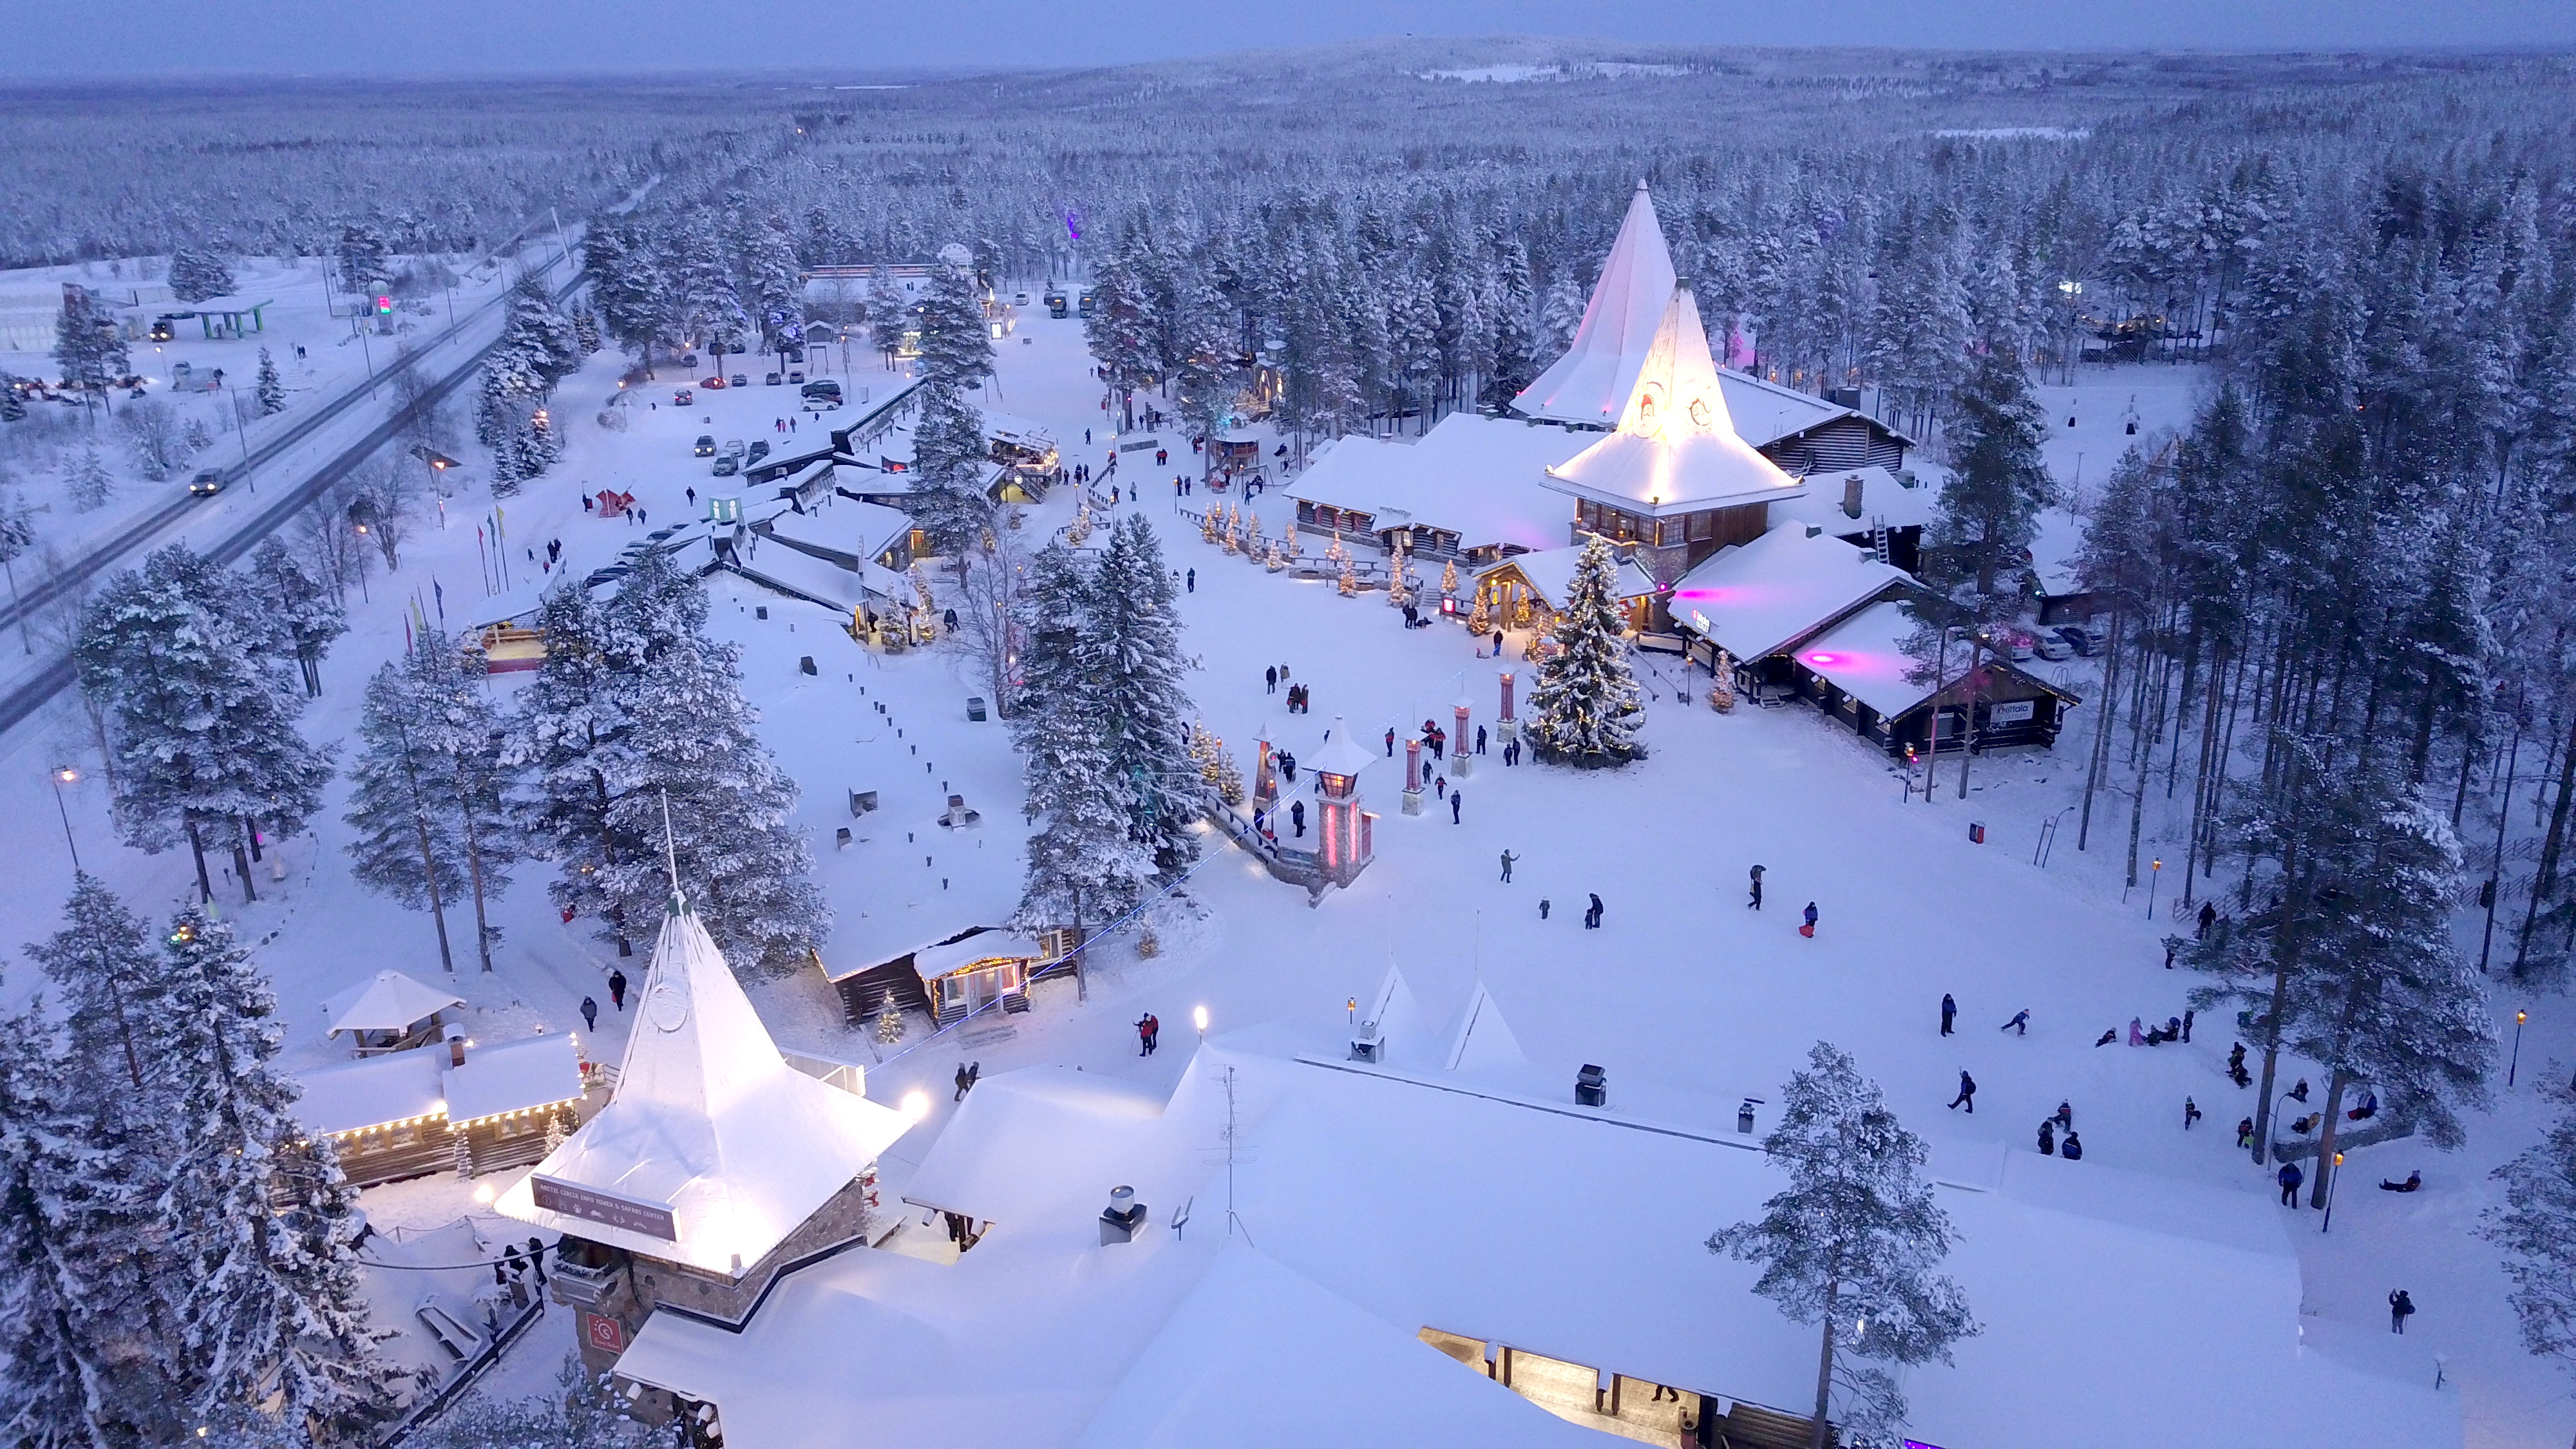 Rovaniemi is also the home to Santa making it a perfect winter wonderland destination for Christmas